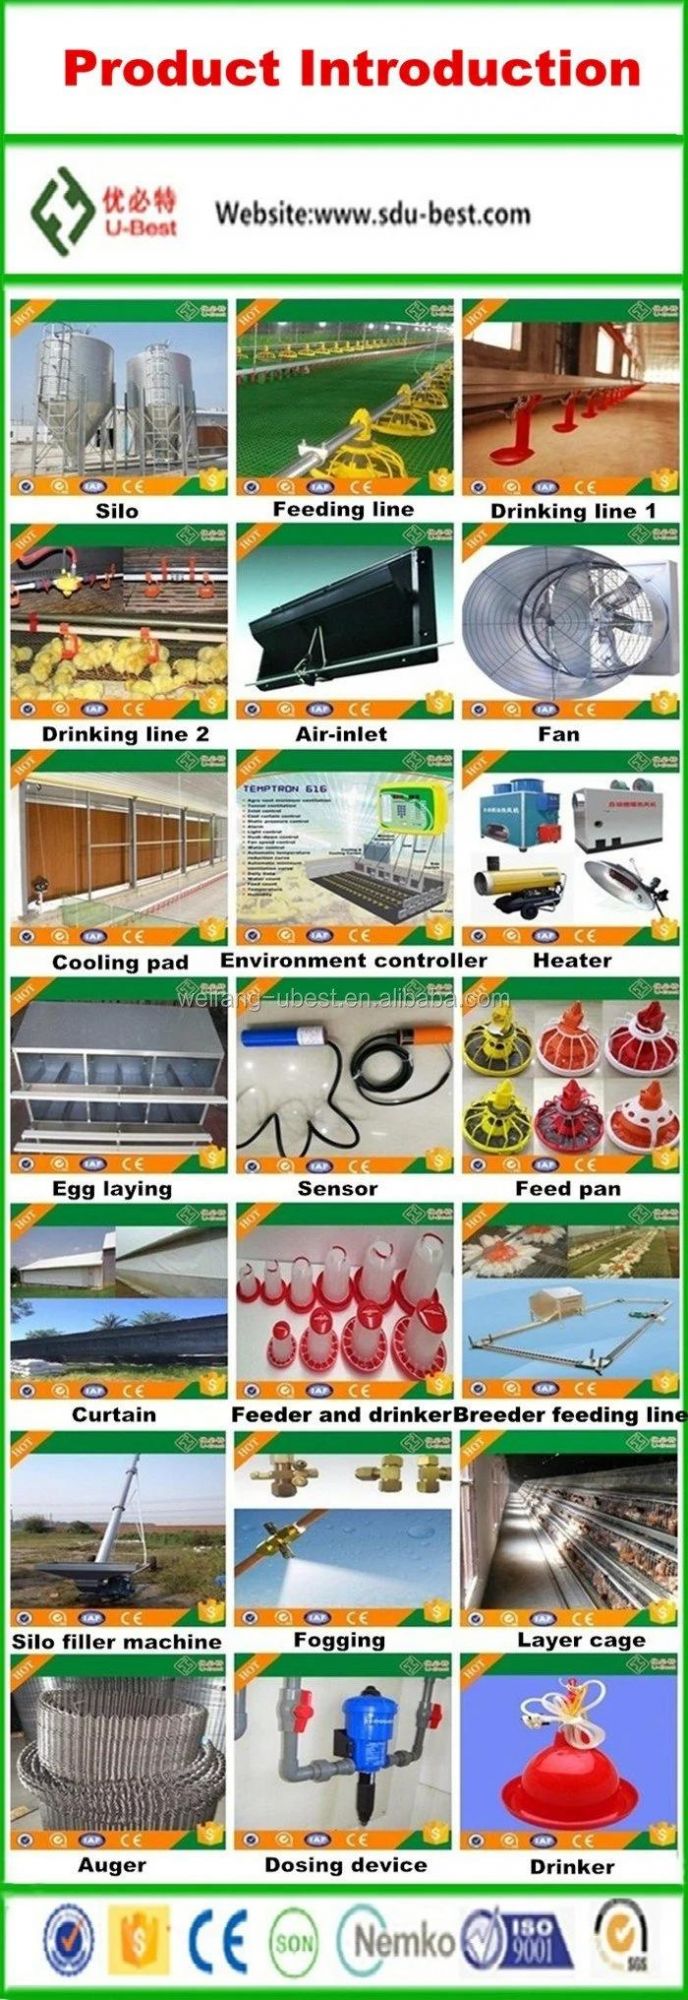 2021 U-Best Hot Poultry Feed Equipment